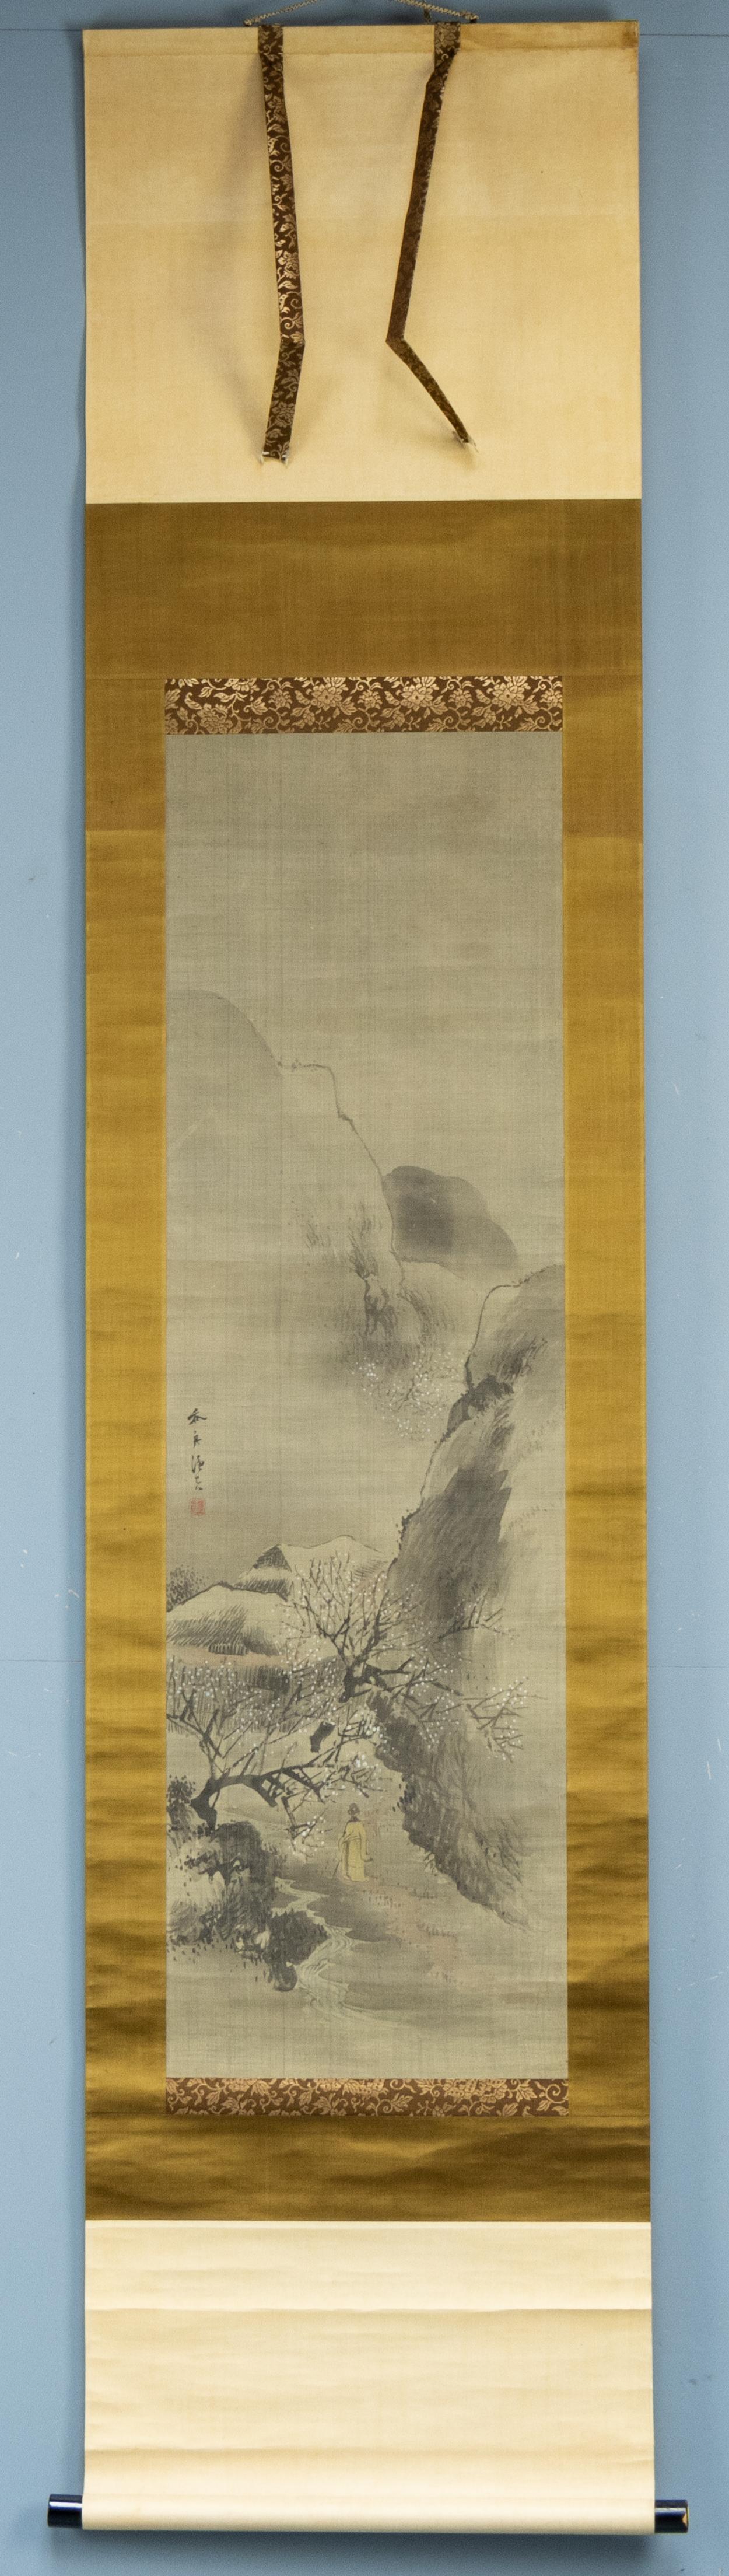 Meiji Ôhara Donshû (1792 - 1857) Edo Period - Smell of Plums in the Night. Scroll  For Sale